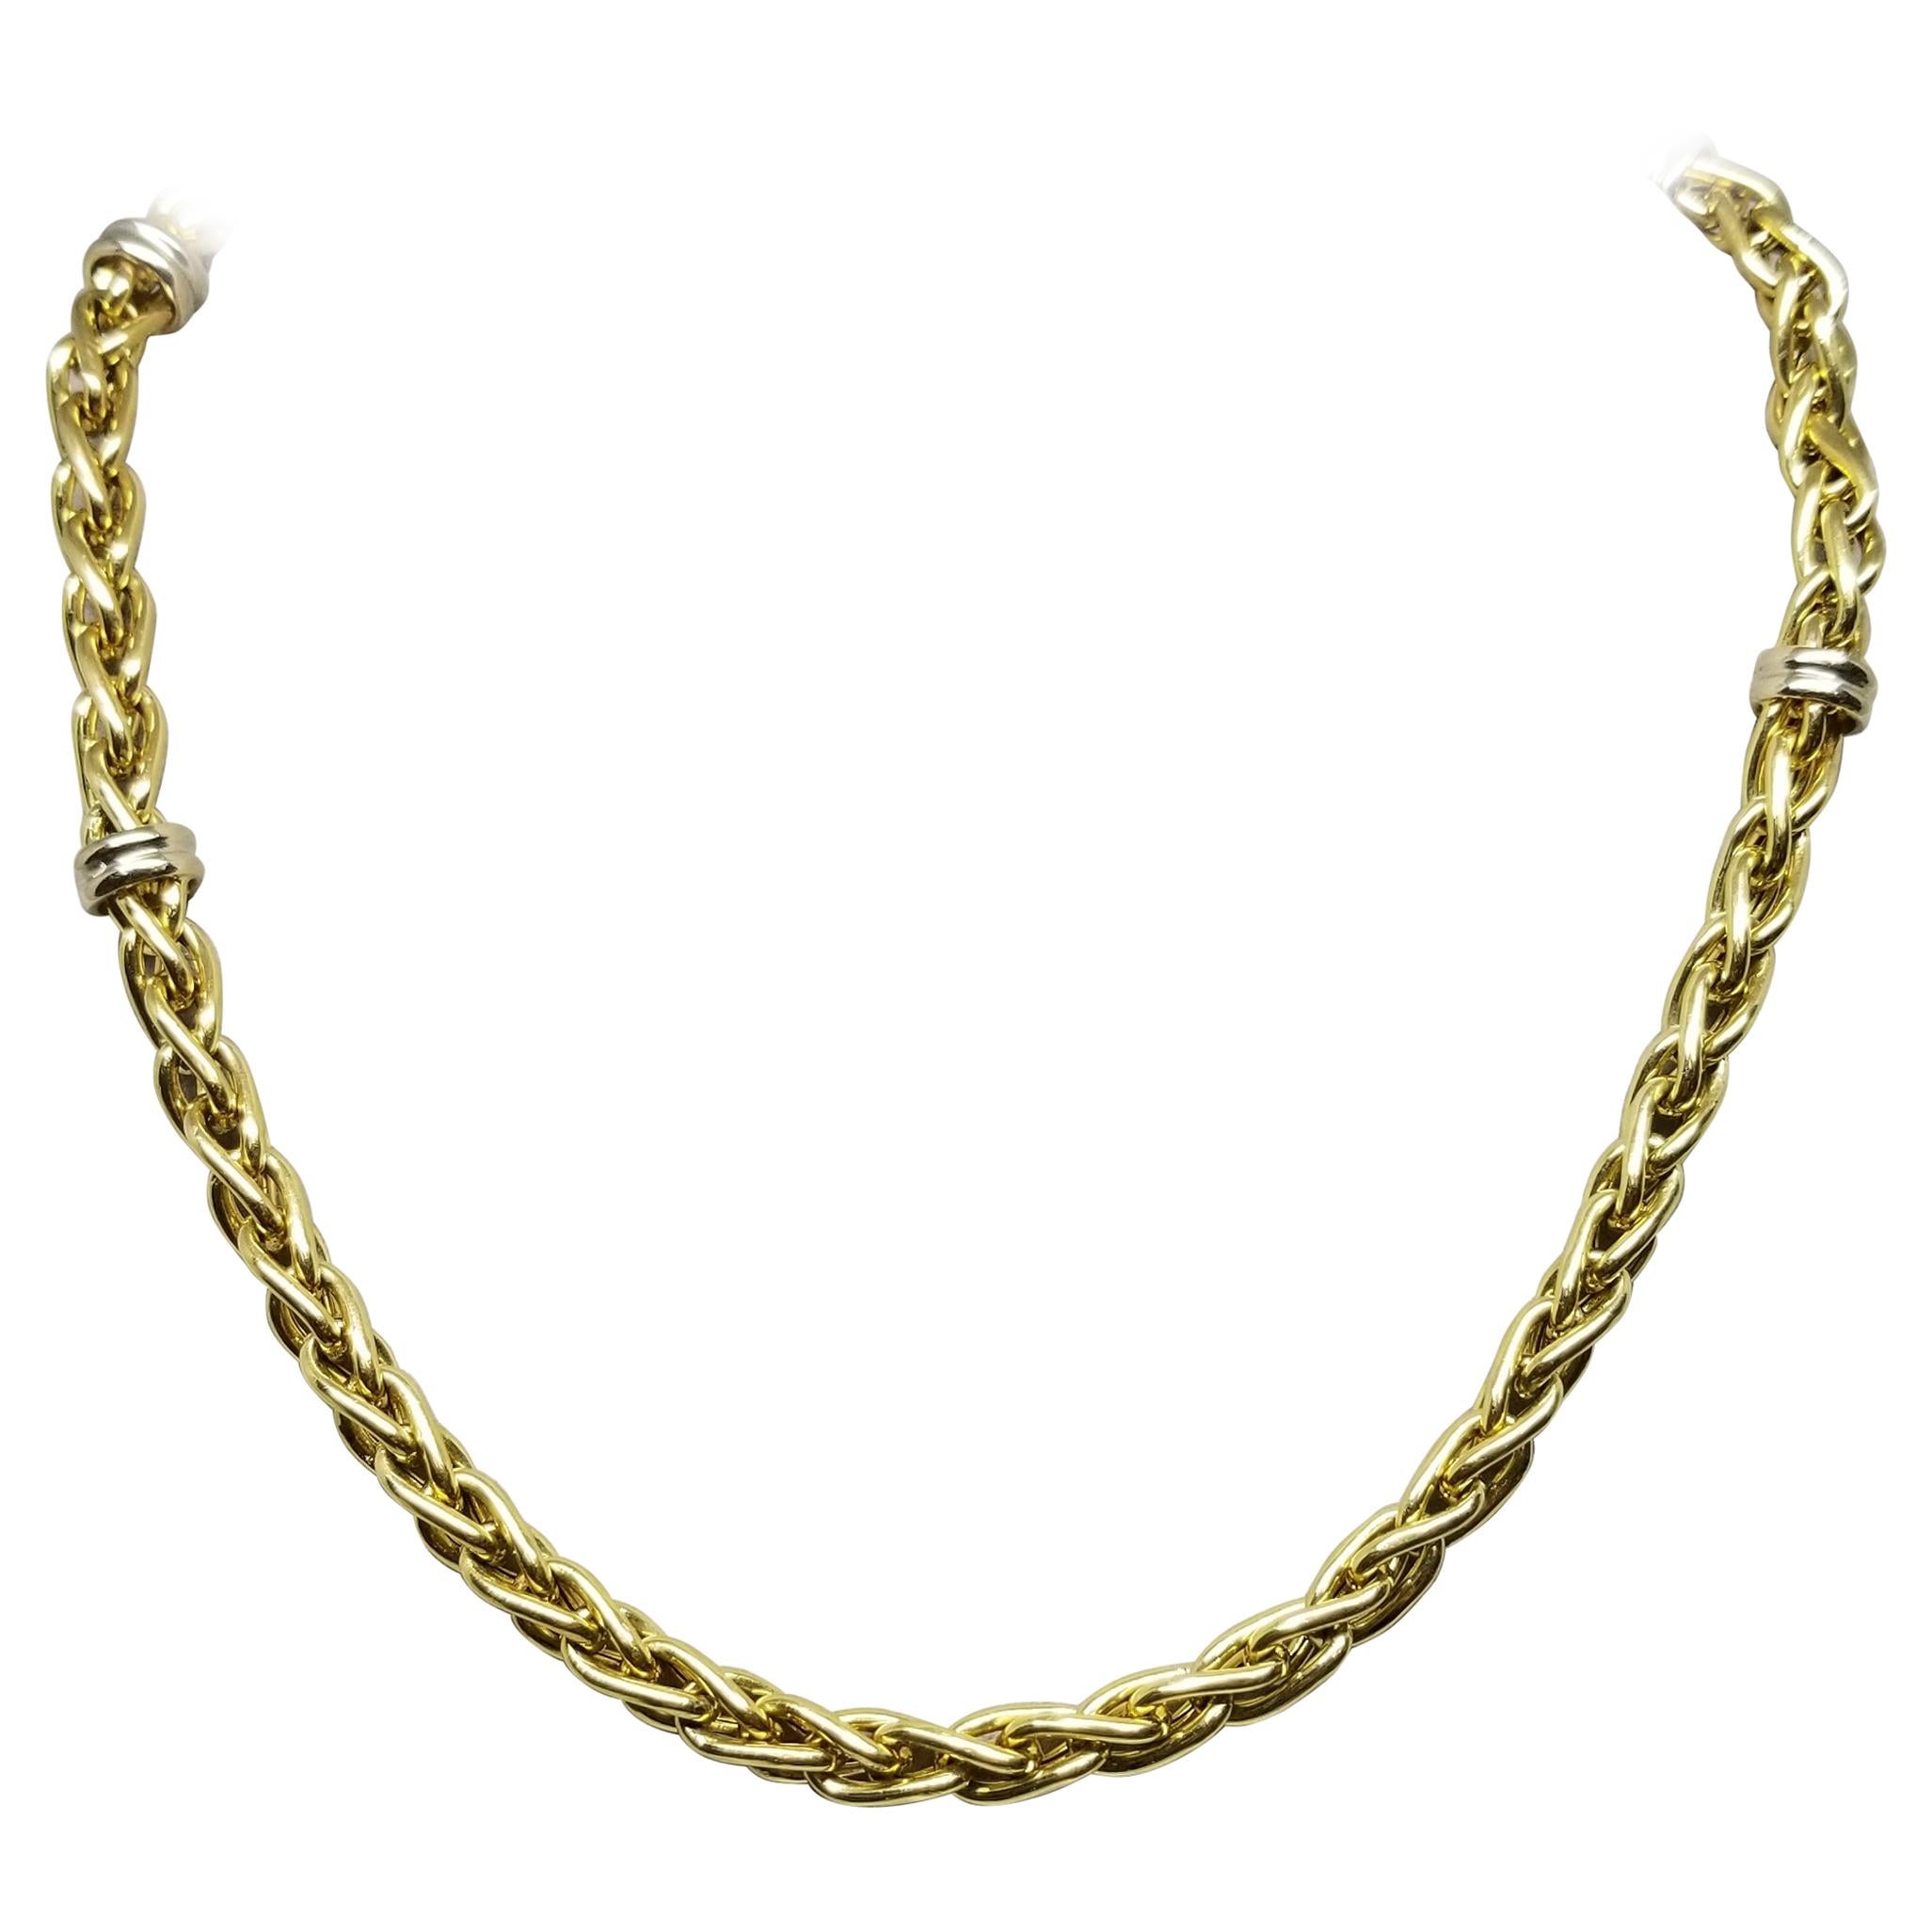 14k yellow gold "Hollow" heavy look necklace with black onyx "Toggle" clasp 